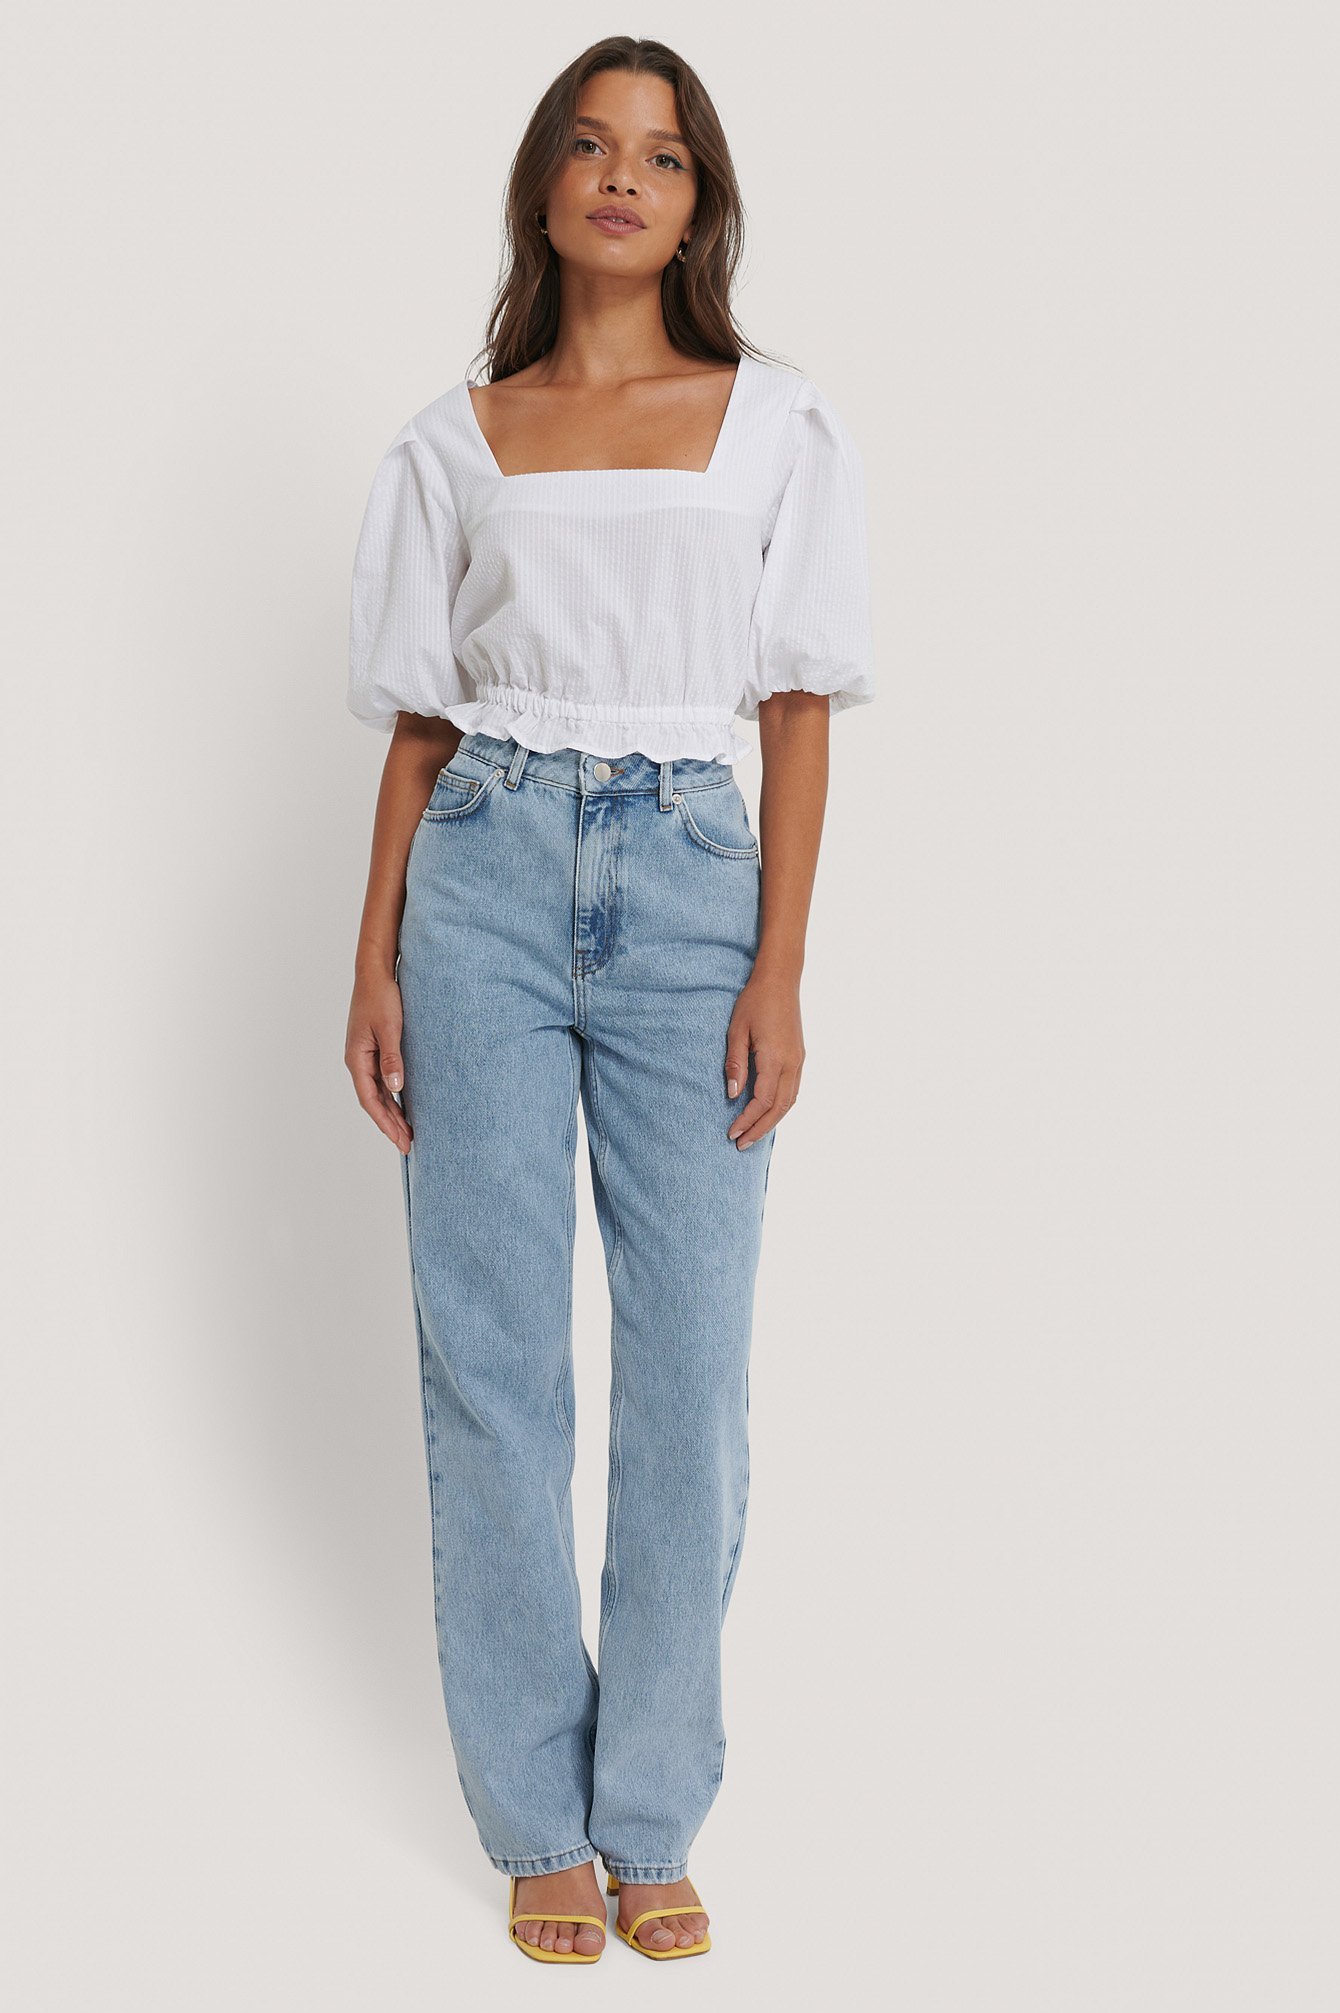 Cropped Seersucker Top Outfit